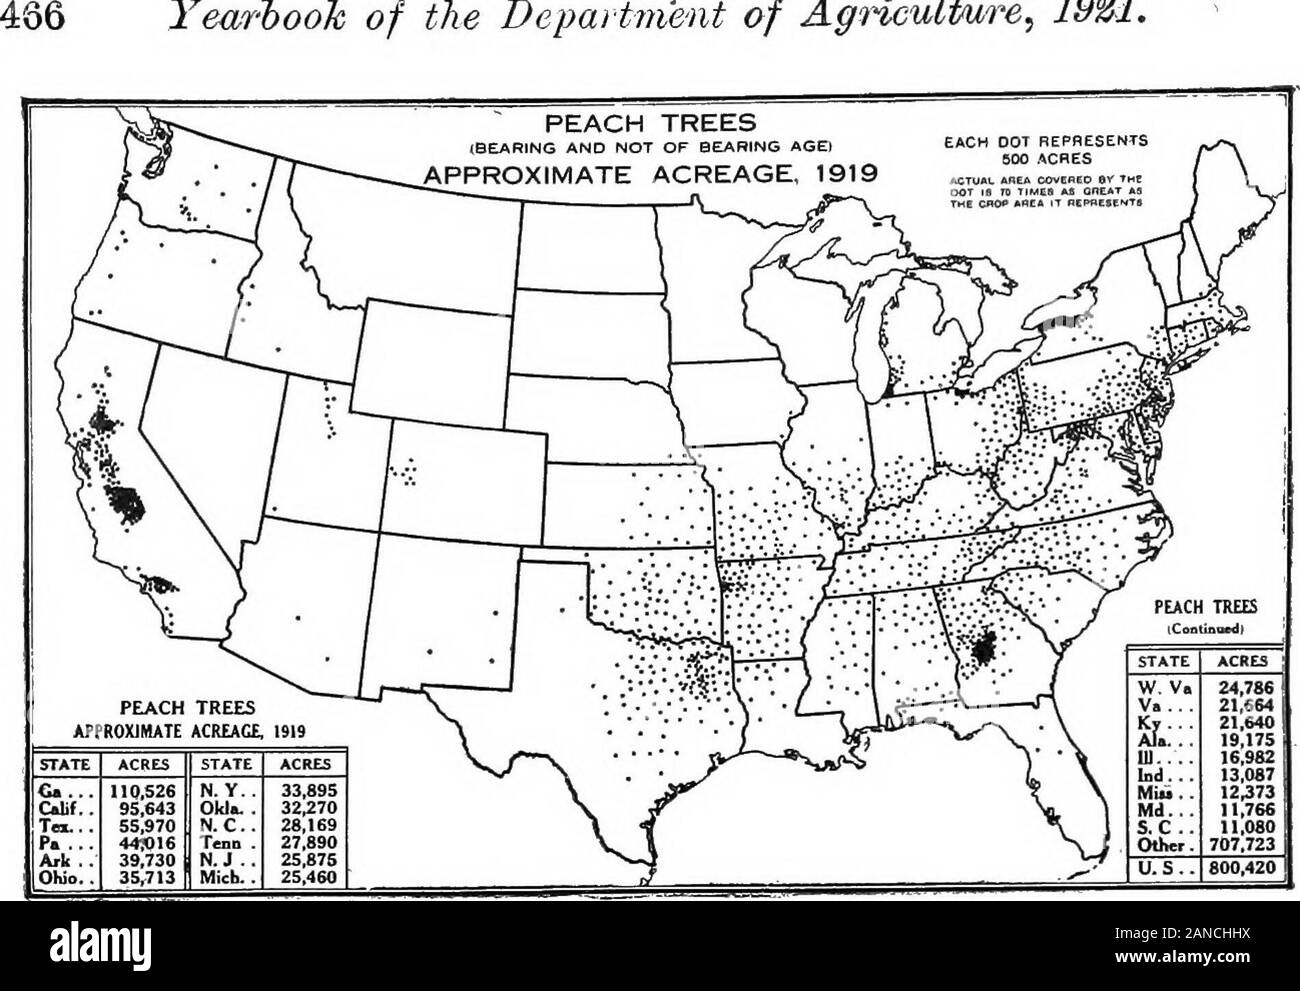 A graphic summary of American agriculture, based largely on the census of 1920 ... . STATE BUSHELS STATE BUSHELS y^ WmH.N.Y..CJif..Ark..Va .. ..Or« . 20,845,77411,769.1516,828.6235,704,8675,650,7265,054,500 ID....Mo... 4,428,3723,540,3343,265,0173,198,5293,021,4482,987,747 ^ ^^ U. S .. 98,582.854] FiQ 63 —The commercial crop of apples in 1919—that is, the quantity sold or tabe sold ^was nearly 100 million bushels, according to the census, constituting three-fourths of the total crop. The West produced over two-flfths of this commercial crop,Washington alone reporting over one-flfth of the tot Stock Photo